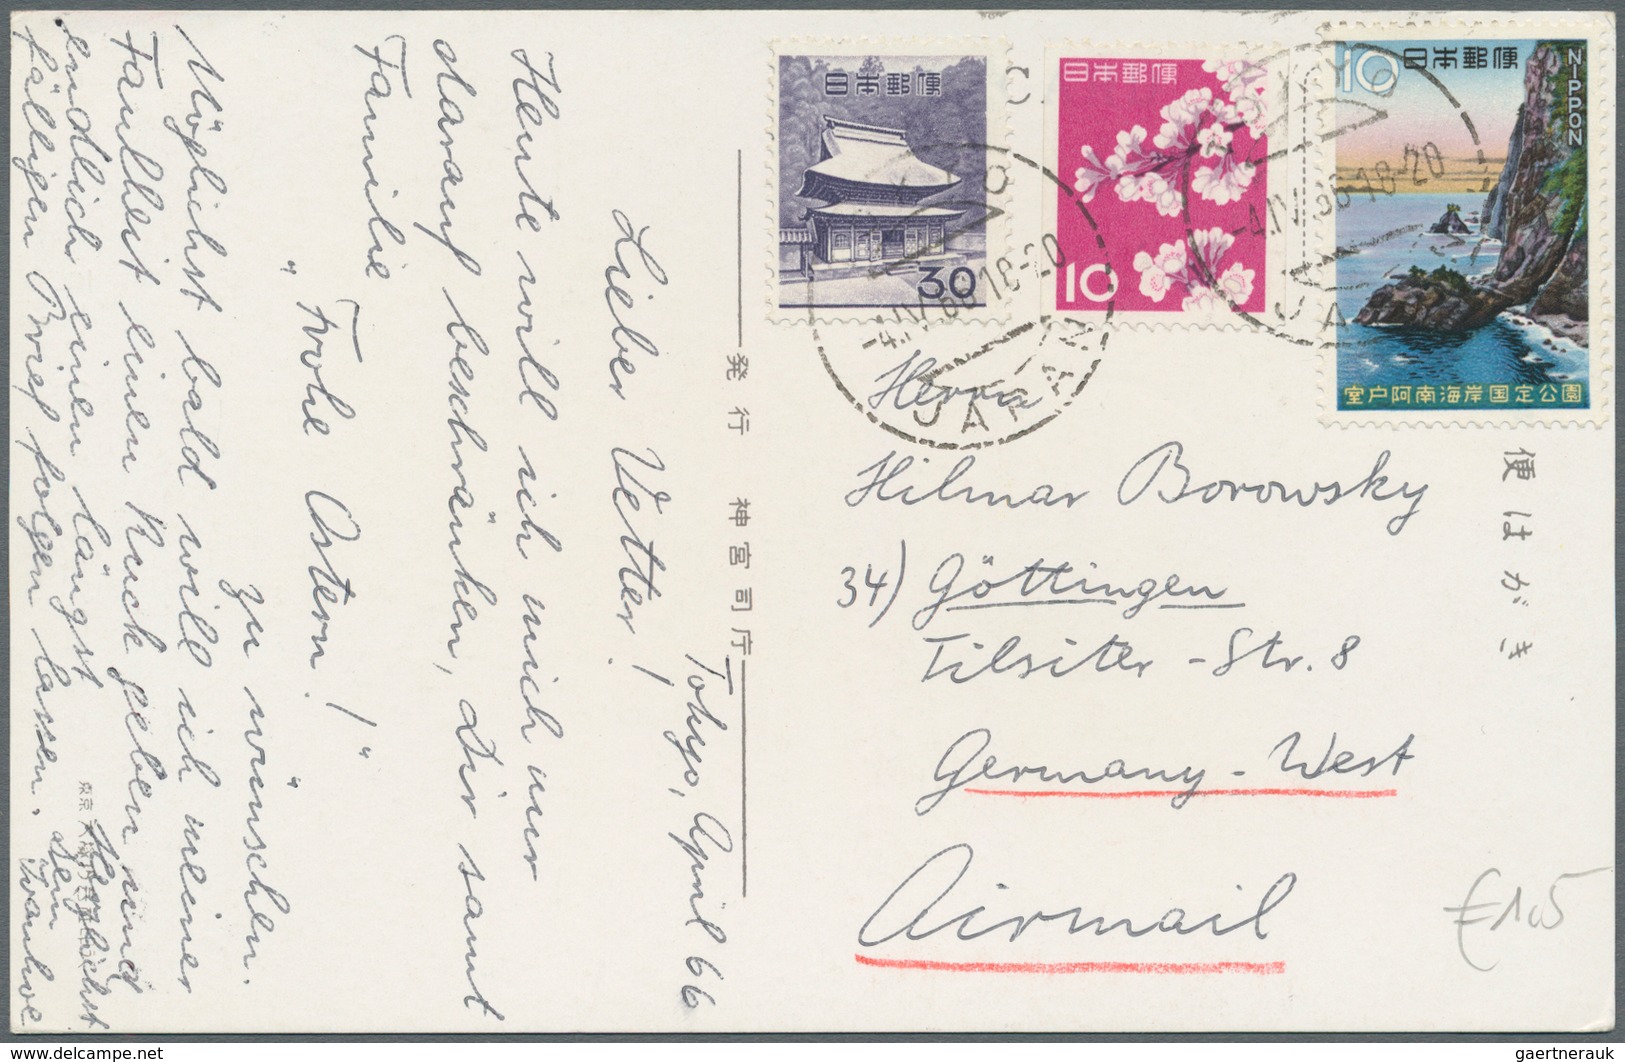 22921 Japan: 1950/90 (ca.), about 200 covers/used ppc/few used stationery, all gone to abroad, inc. regist